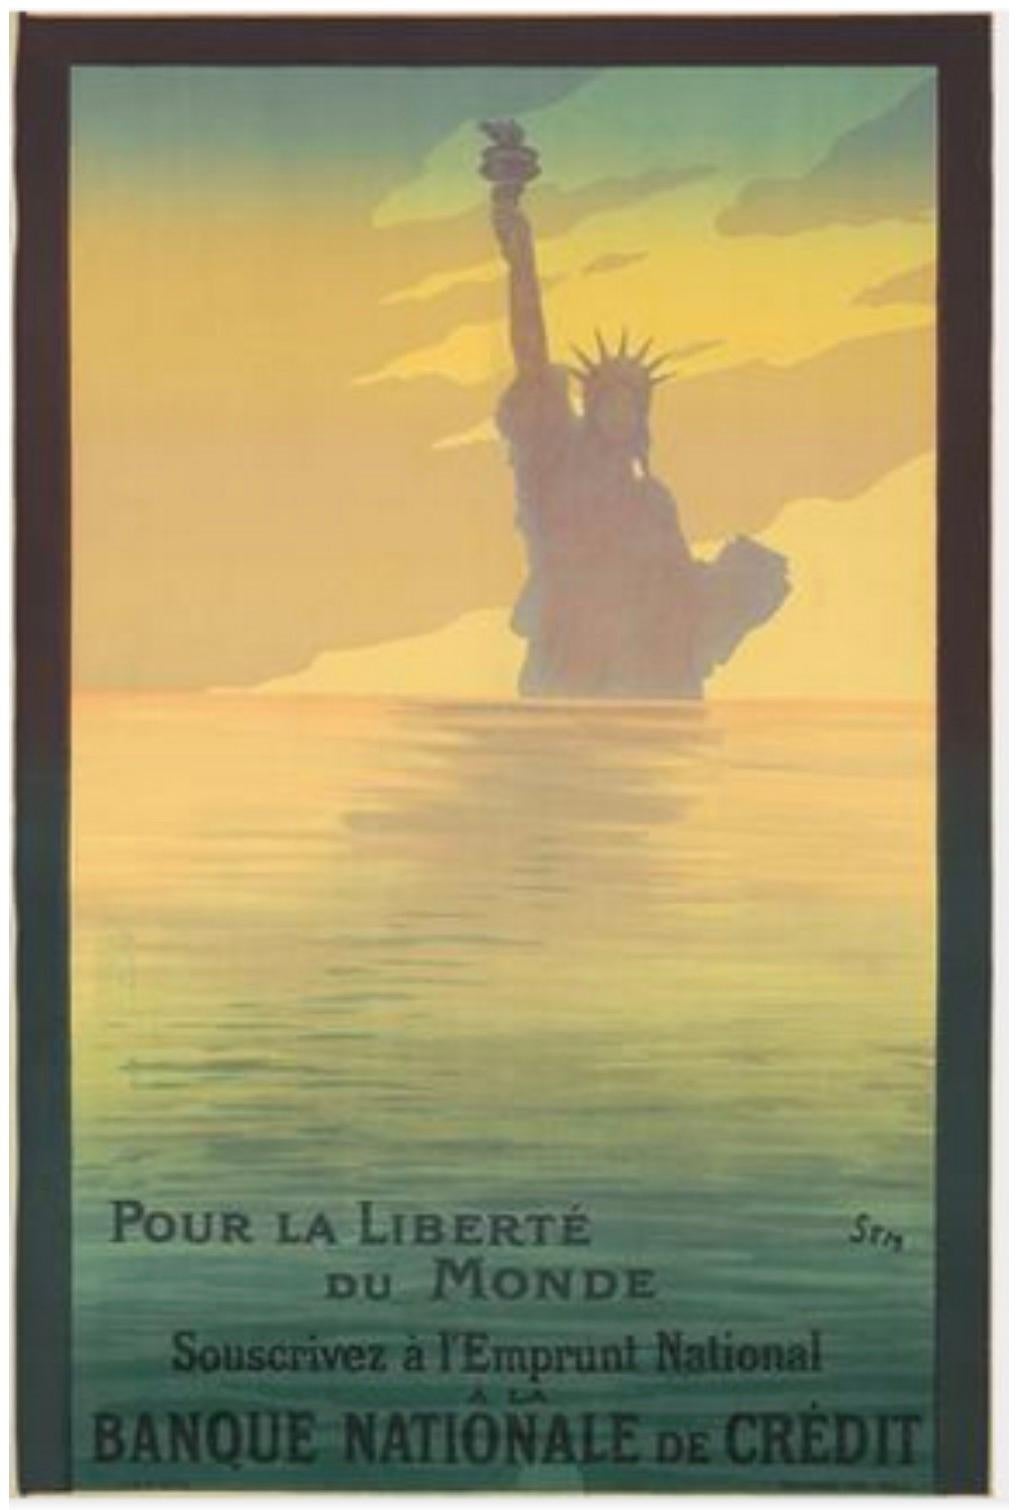 Artist: SEM Georges Goursat (French, 1863-1934)

Date of Origin: 1917

Medium: Original Stone Lithograph Vintage Poster

Size: 31″ x 47”

 

Just 31 years after the Statue of Liberty was installed in New York’s harbor, Sem imagines our Lady sinking